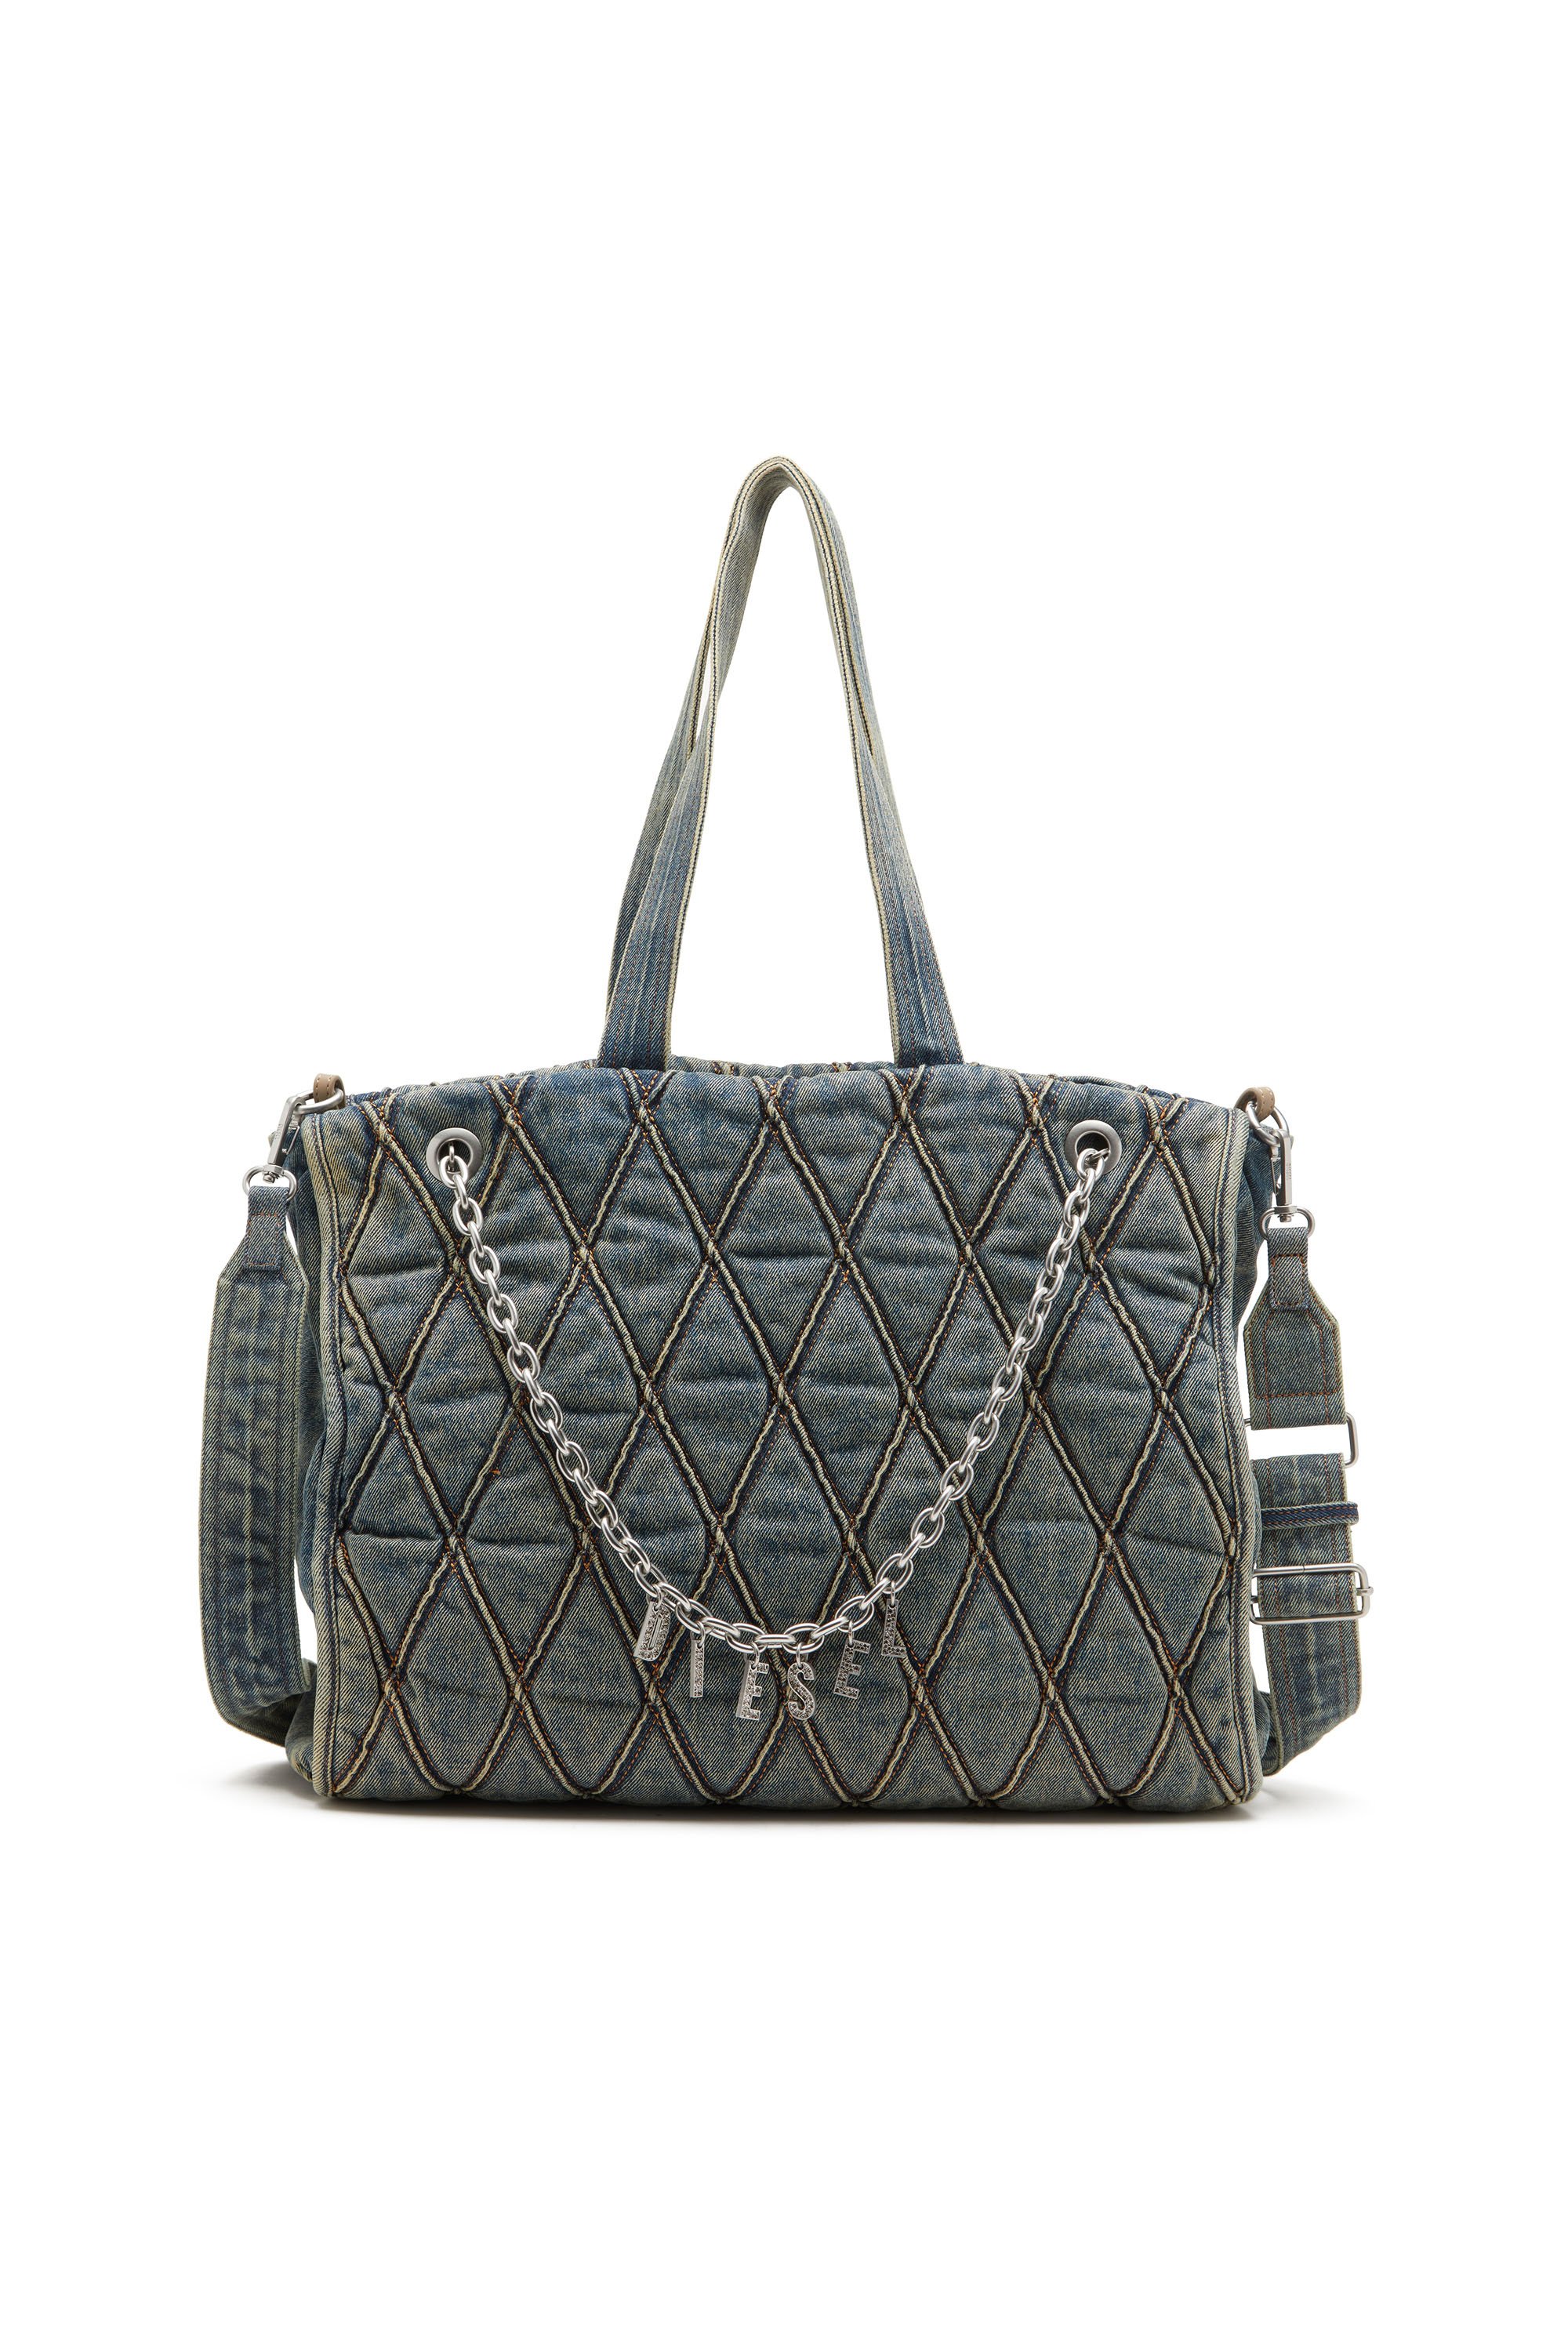 Diesel - CHARM-D SHOPPER, Female Charm-D-Tote bag in Argyle quilted denim in Blue - Image 1